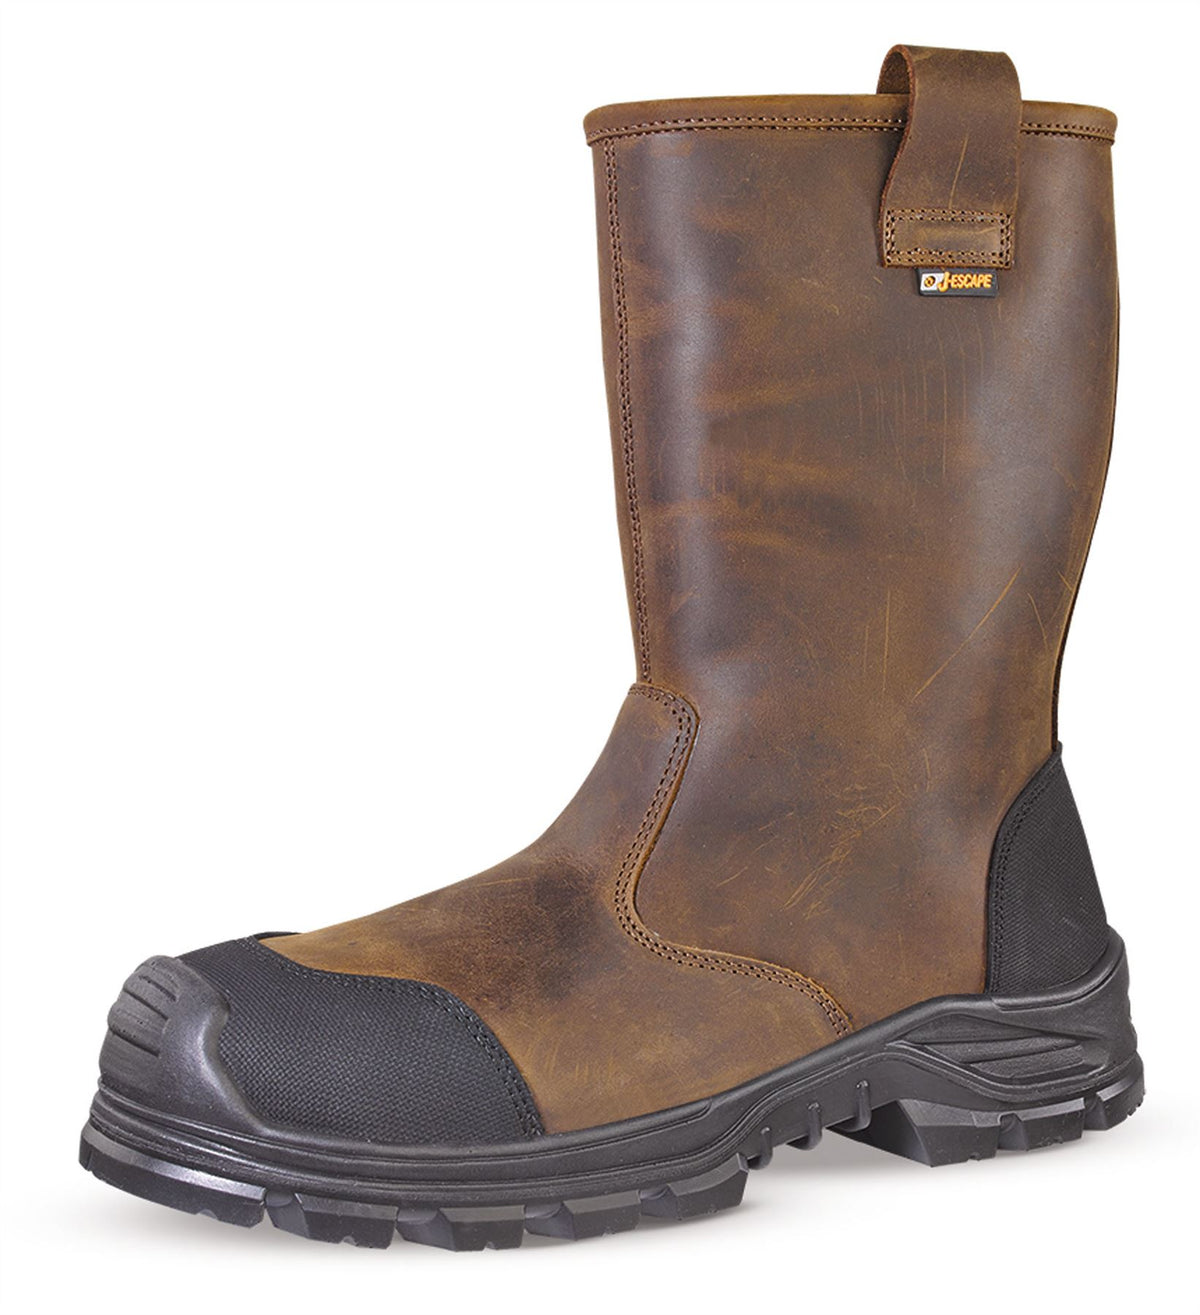 Jallatte Jalcypress Brown Full Grain Leather Rigger Safety Work Boots